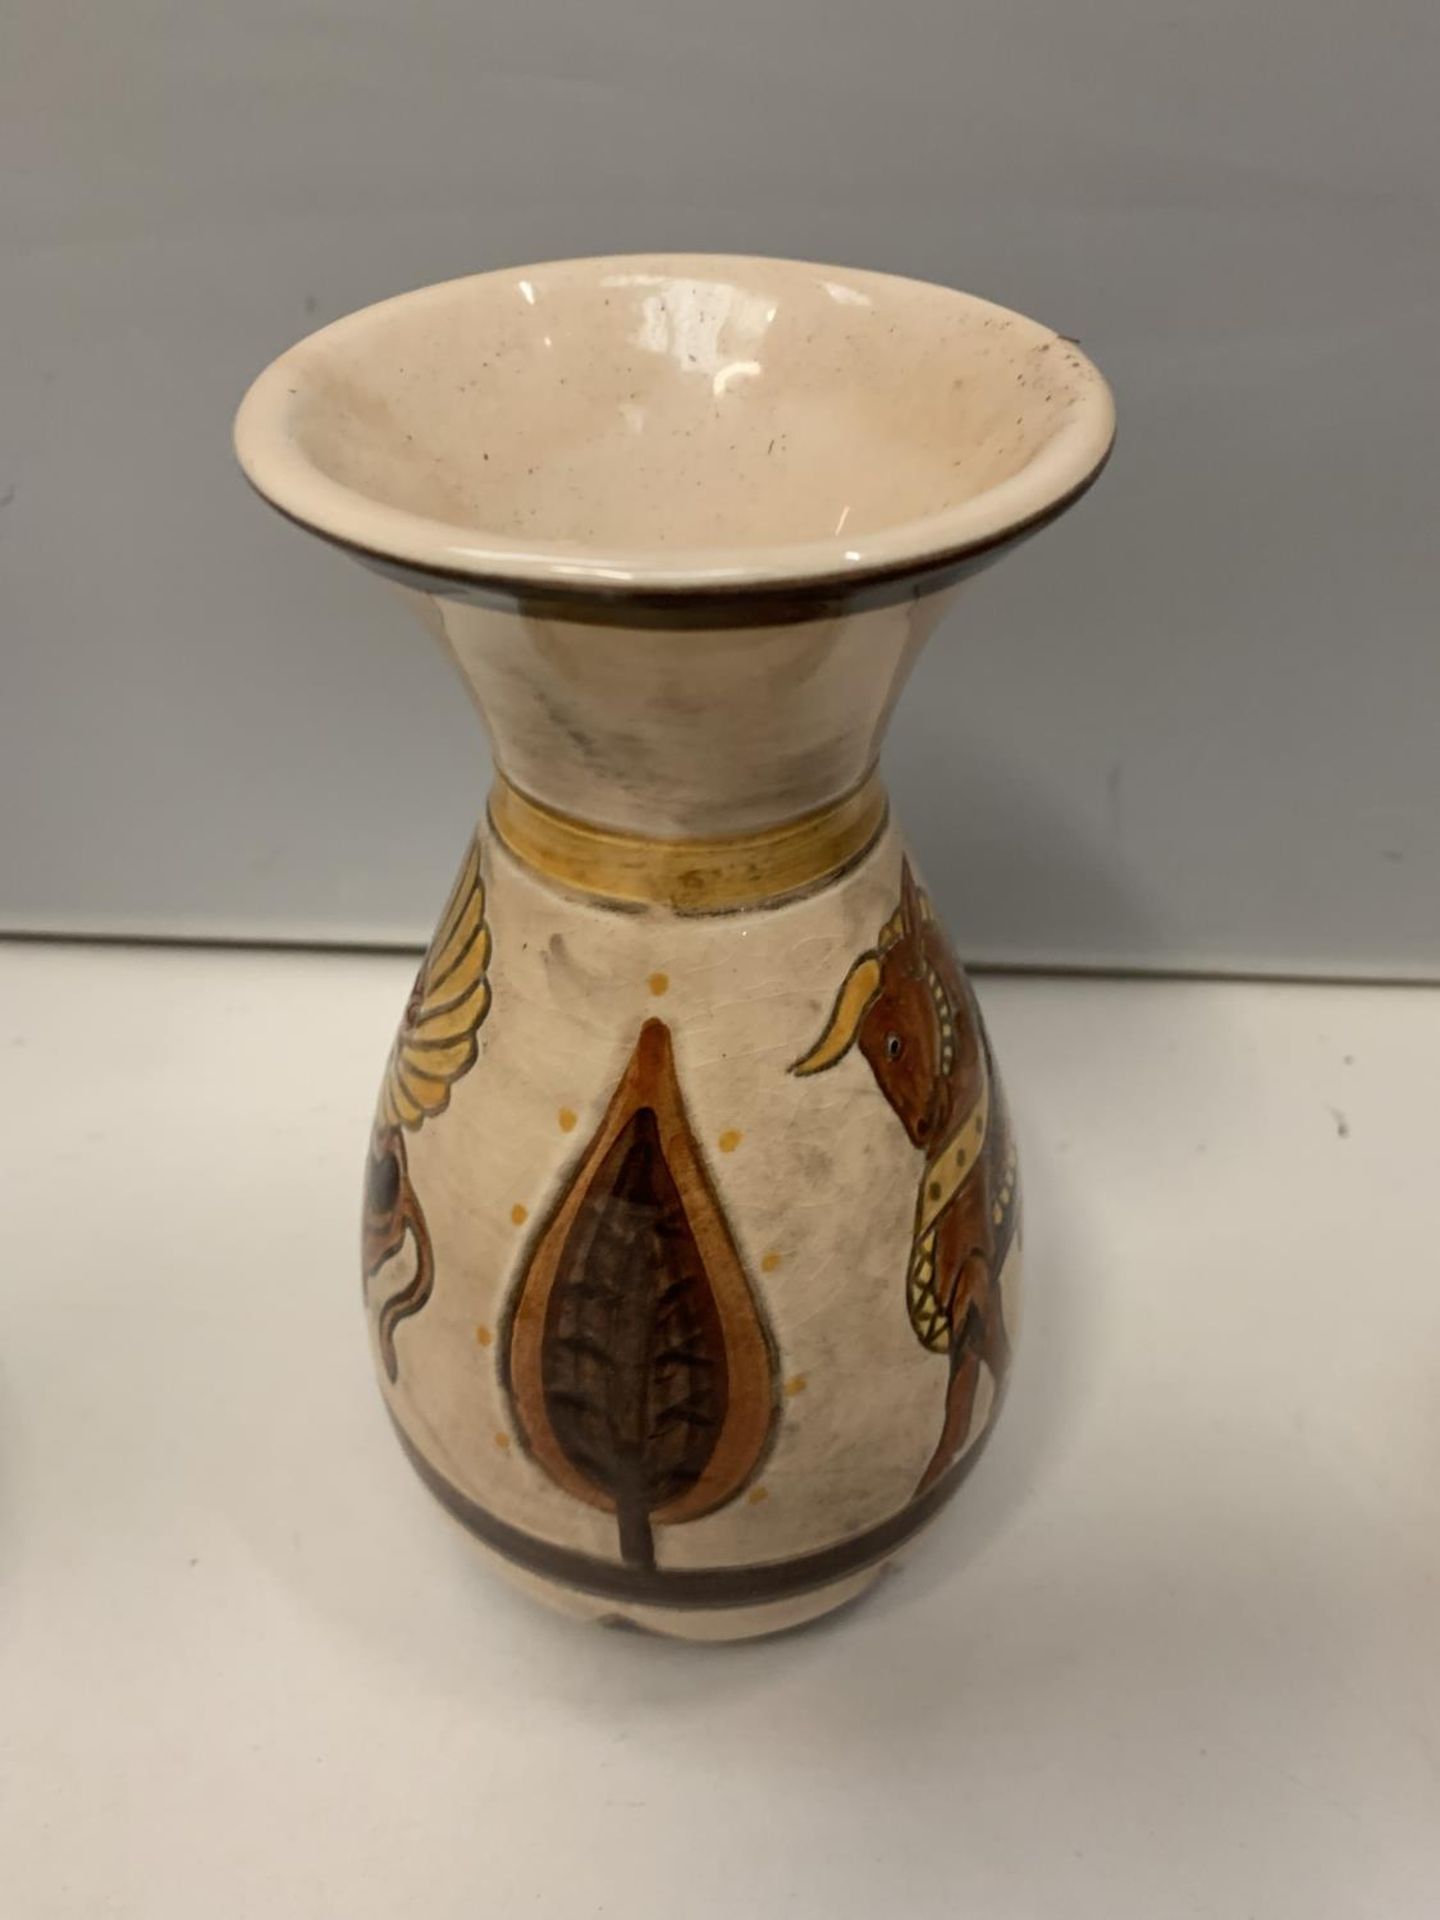 THREE ITEMS OF SYLVAC TO INCLUDE TWO PLANT POTS CREAM WITH LEAF DESIGN AND A VASE - Image 2 of 5